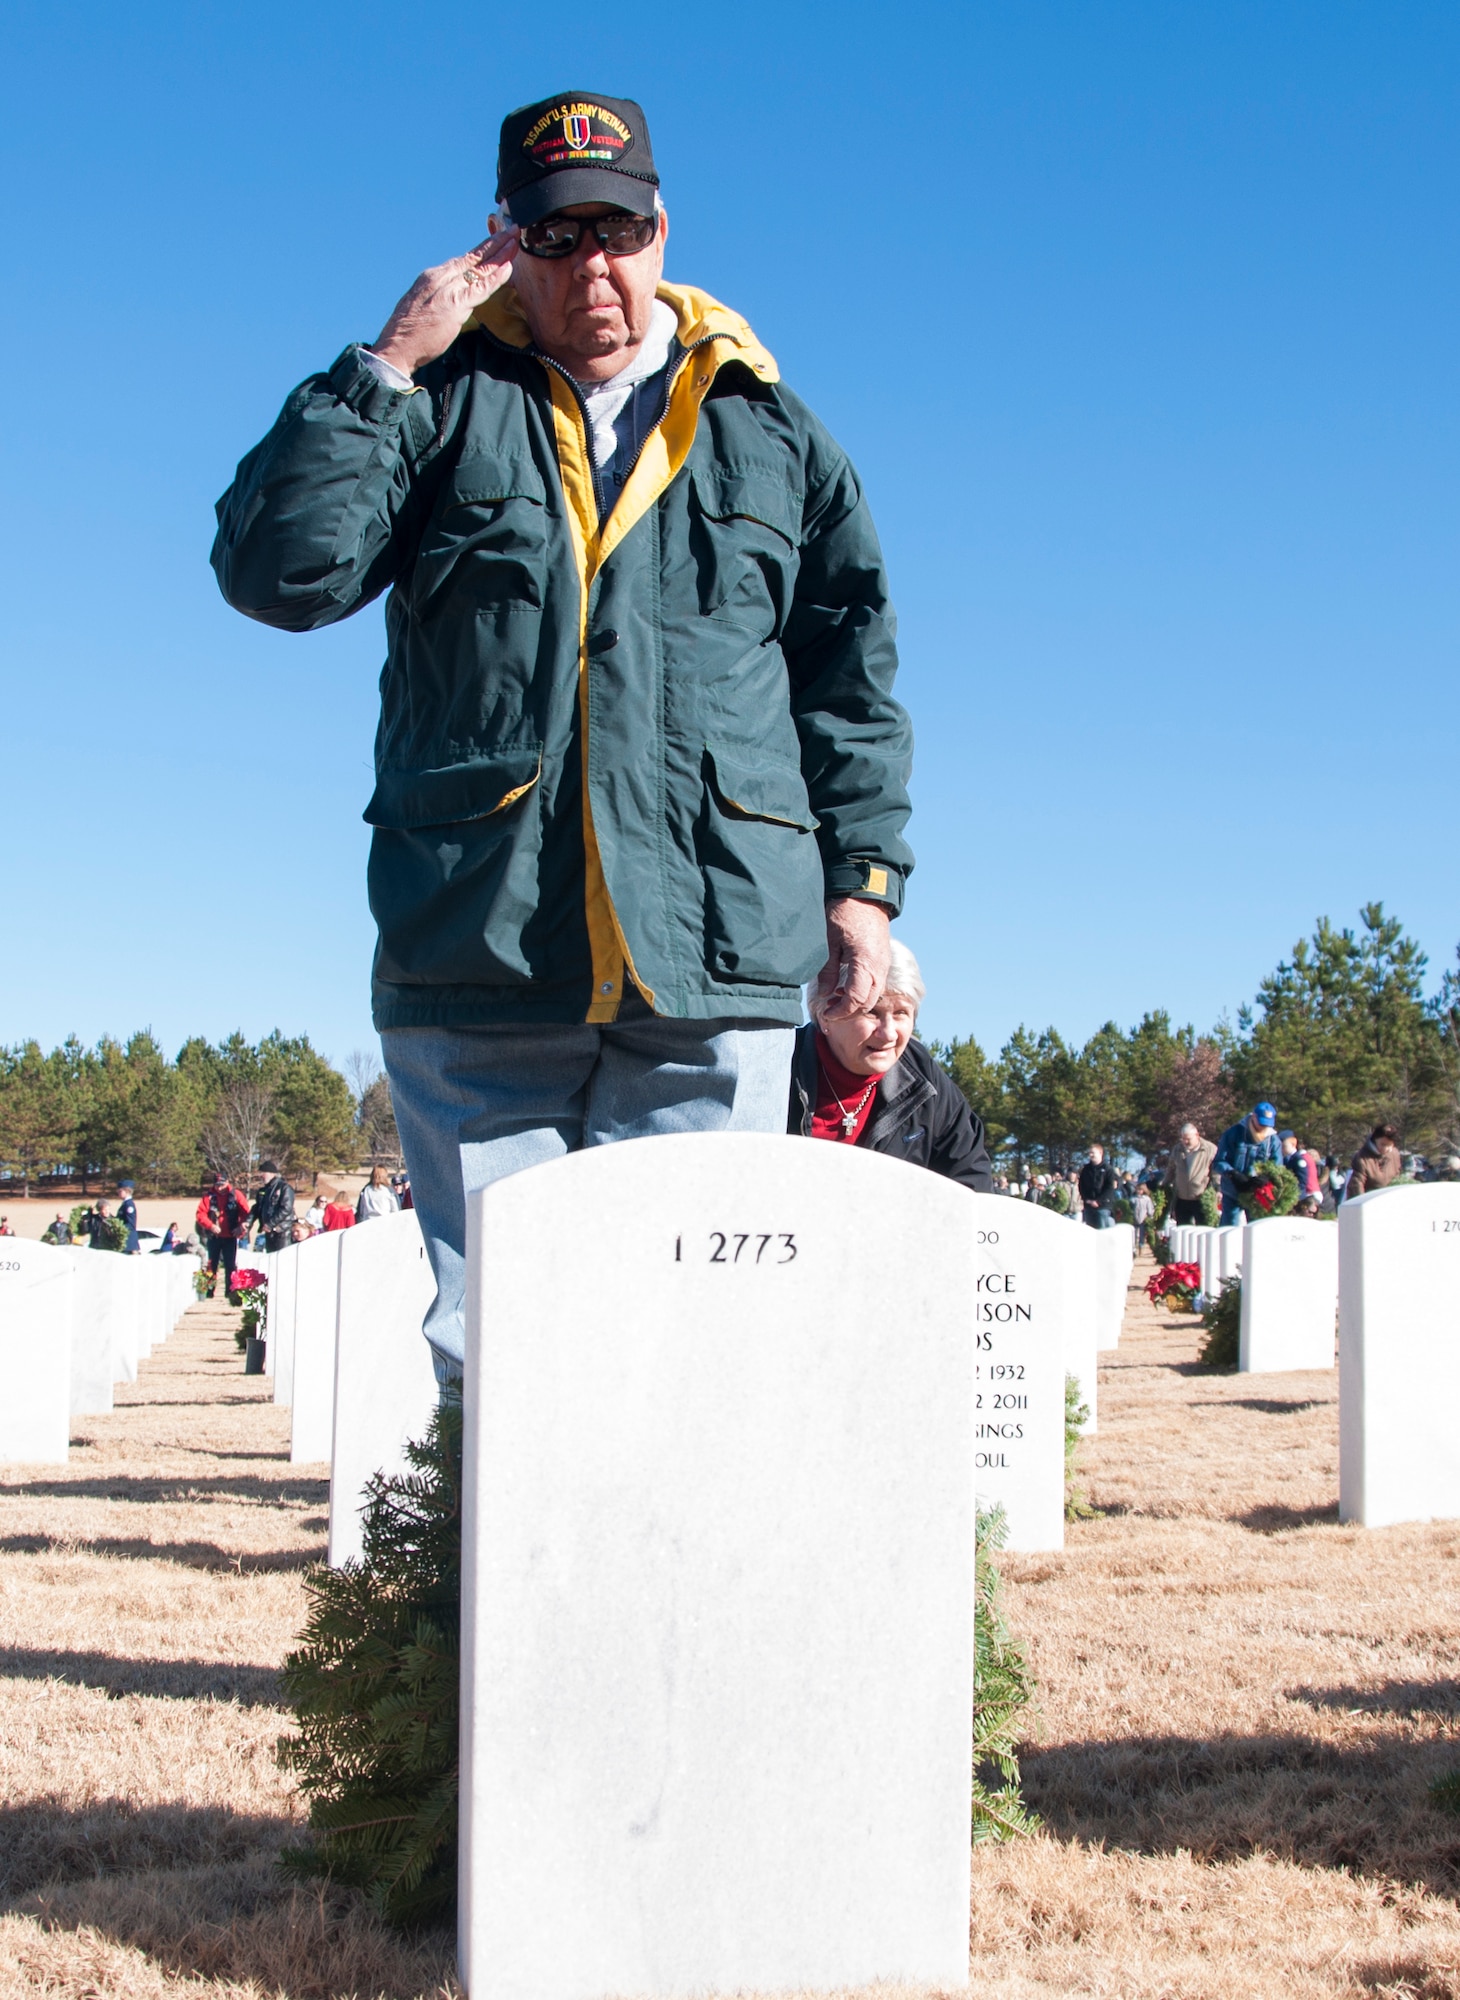 A volunteer salutes a gravestone after laying his wreath at the Wreaths Across America ceremony in Canton, Ga. at Georgia National Cemetery Dec. 13, 2014. Thousands showed up to GNC to honor America’s heroes. (U.S. Air Force photo/Senior Airman Daniel Phelps)